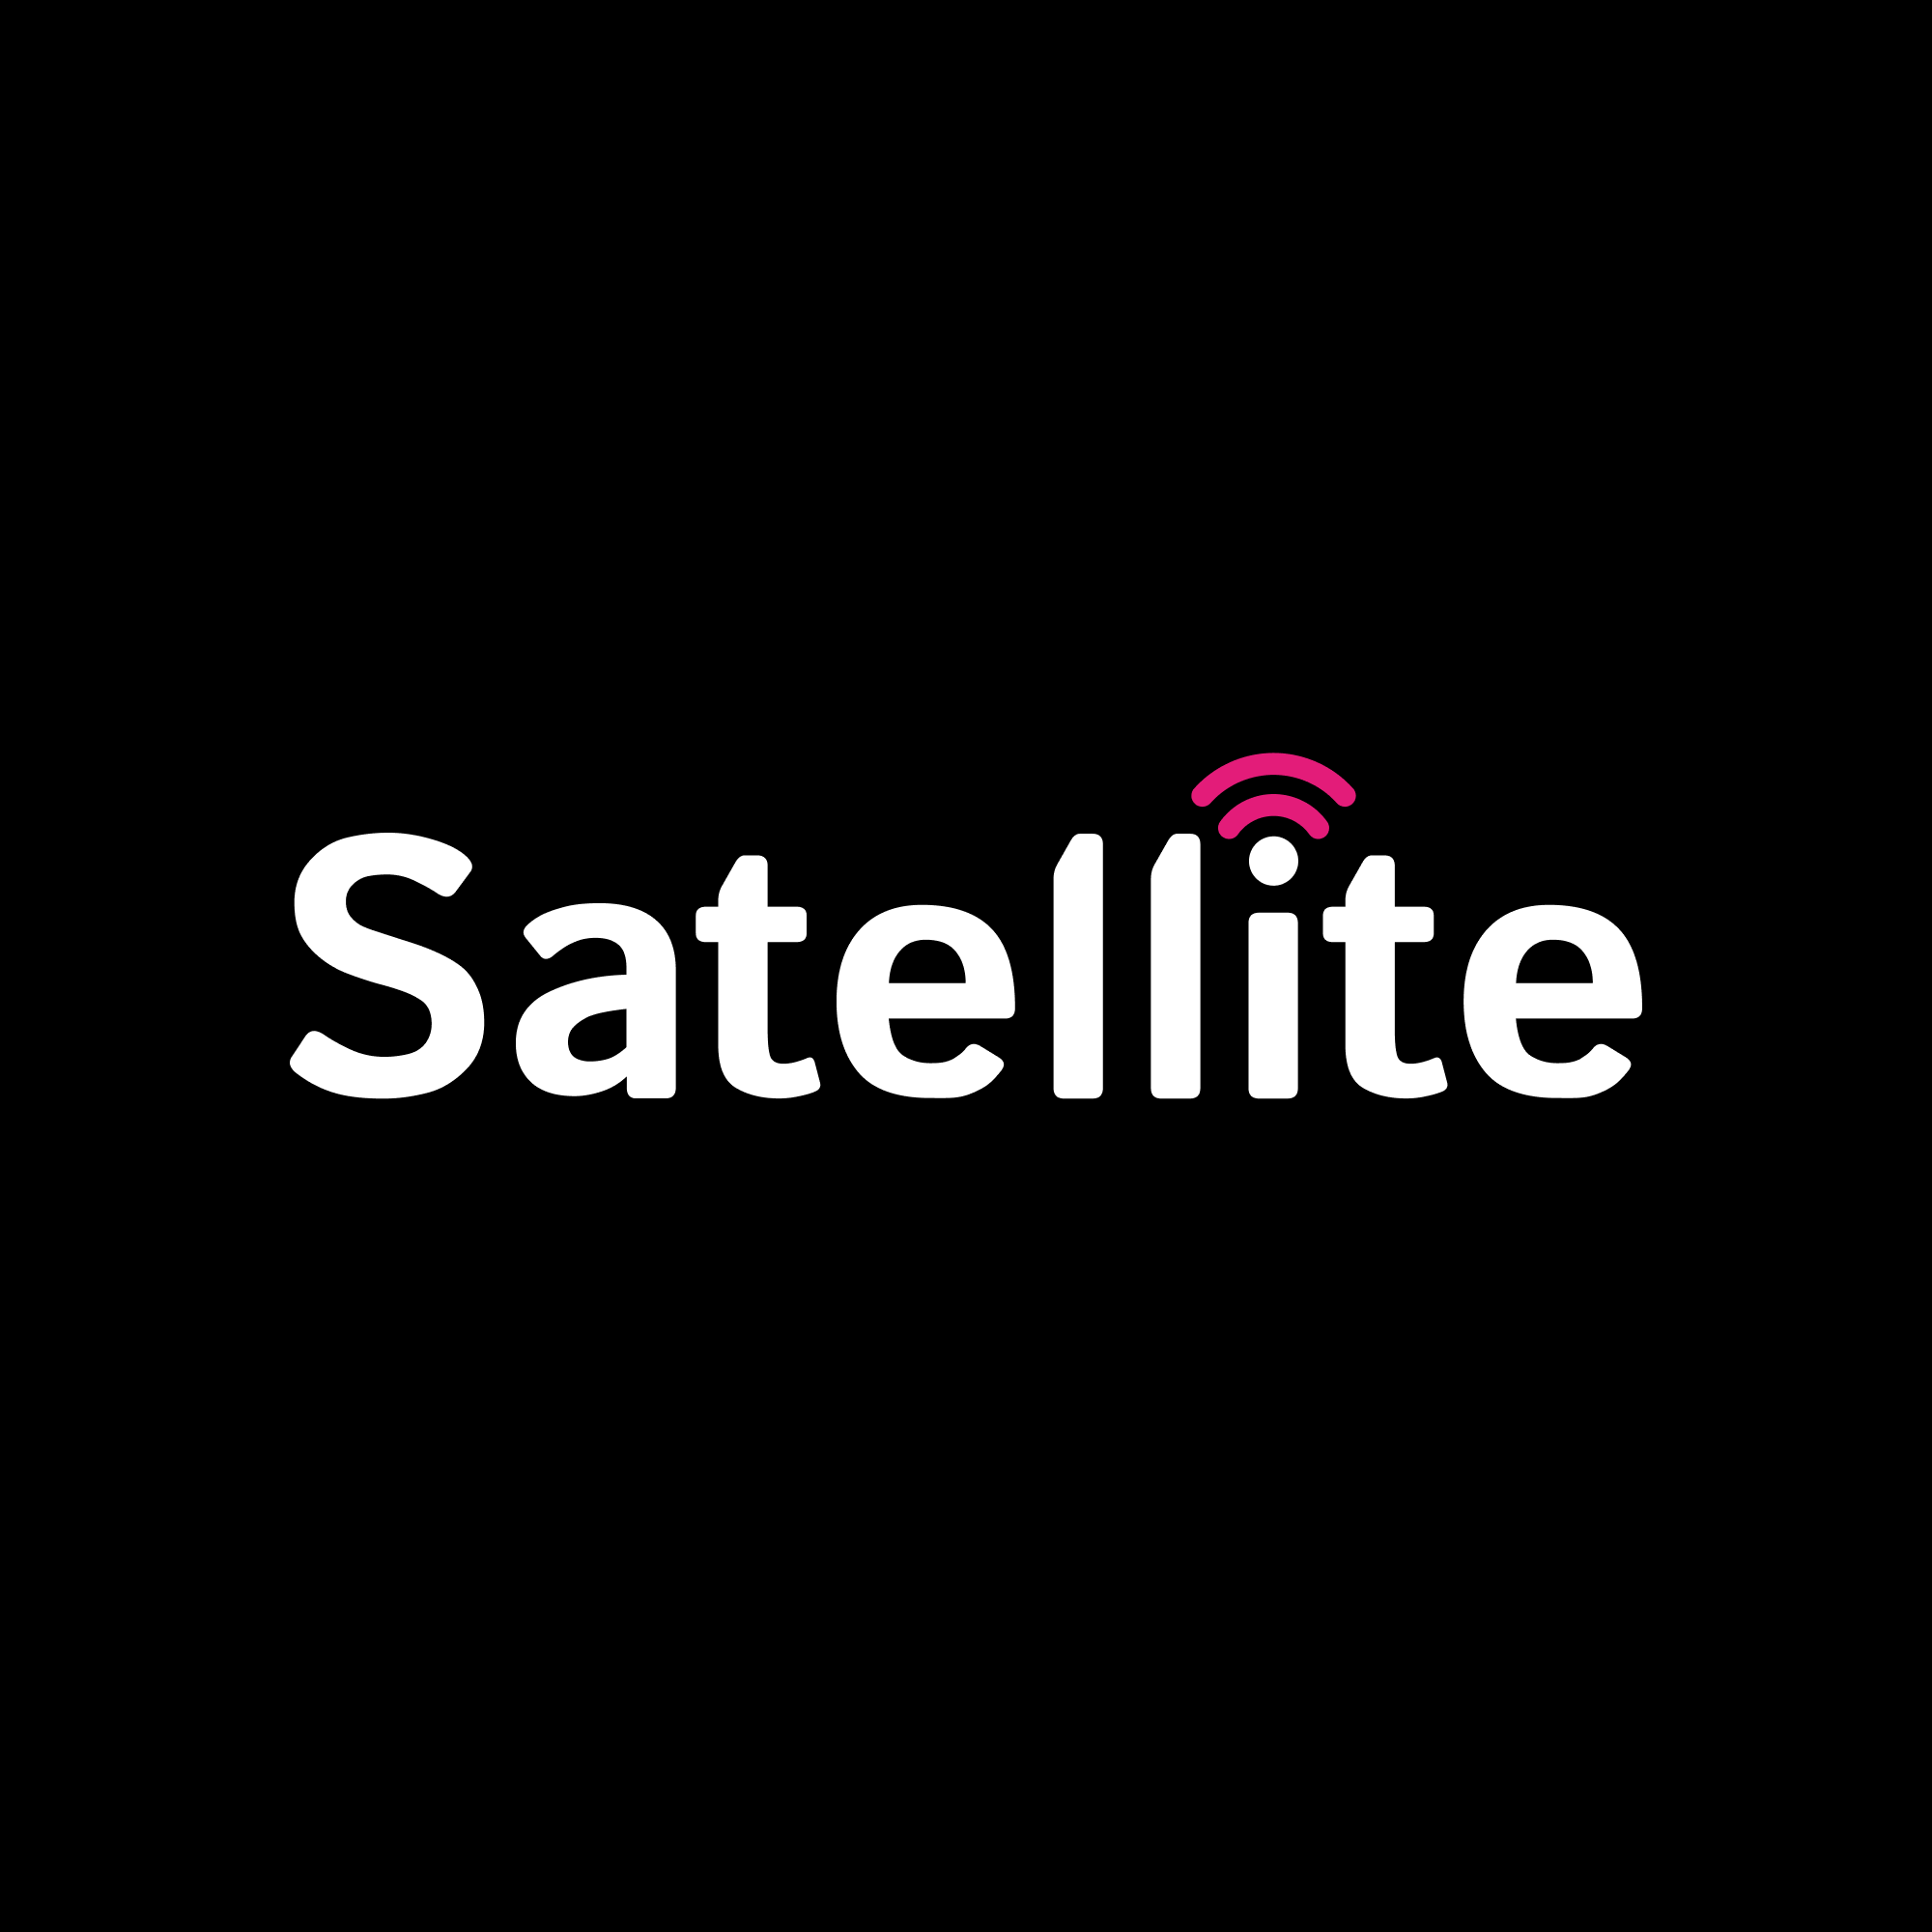 Satellite Launches To Provide Dedicated Software Development Teams To Startups And Tech Enabled Companies